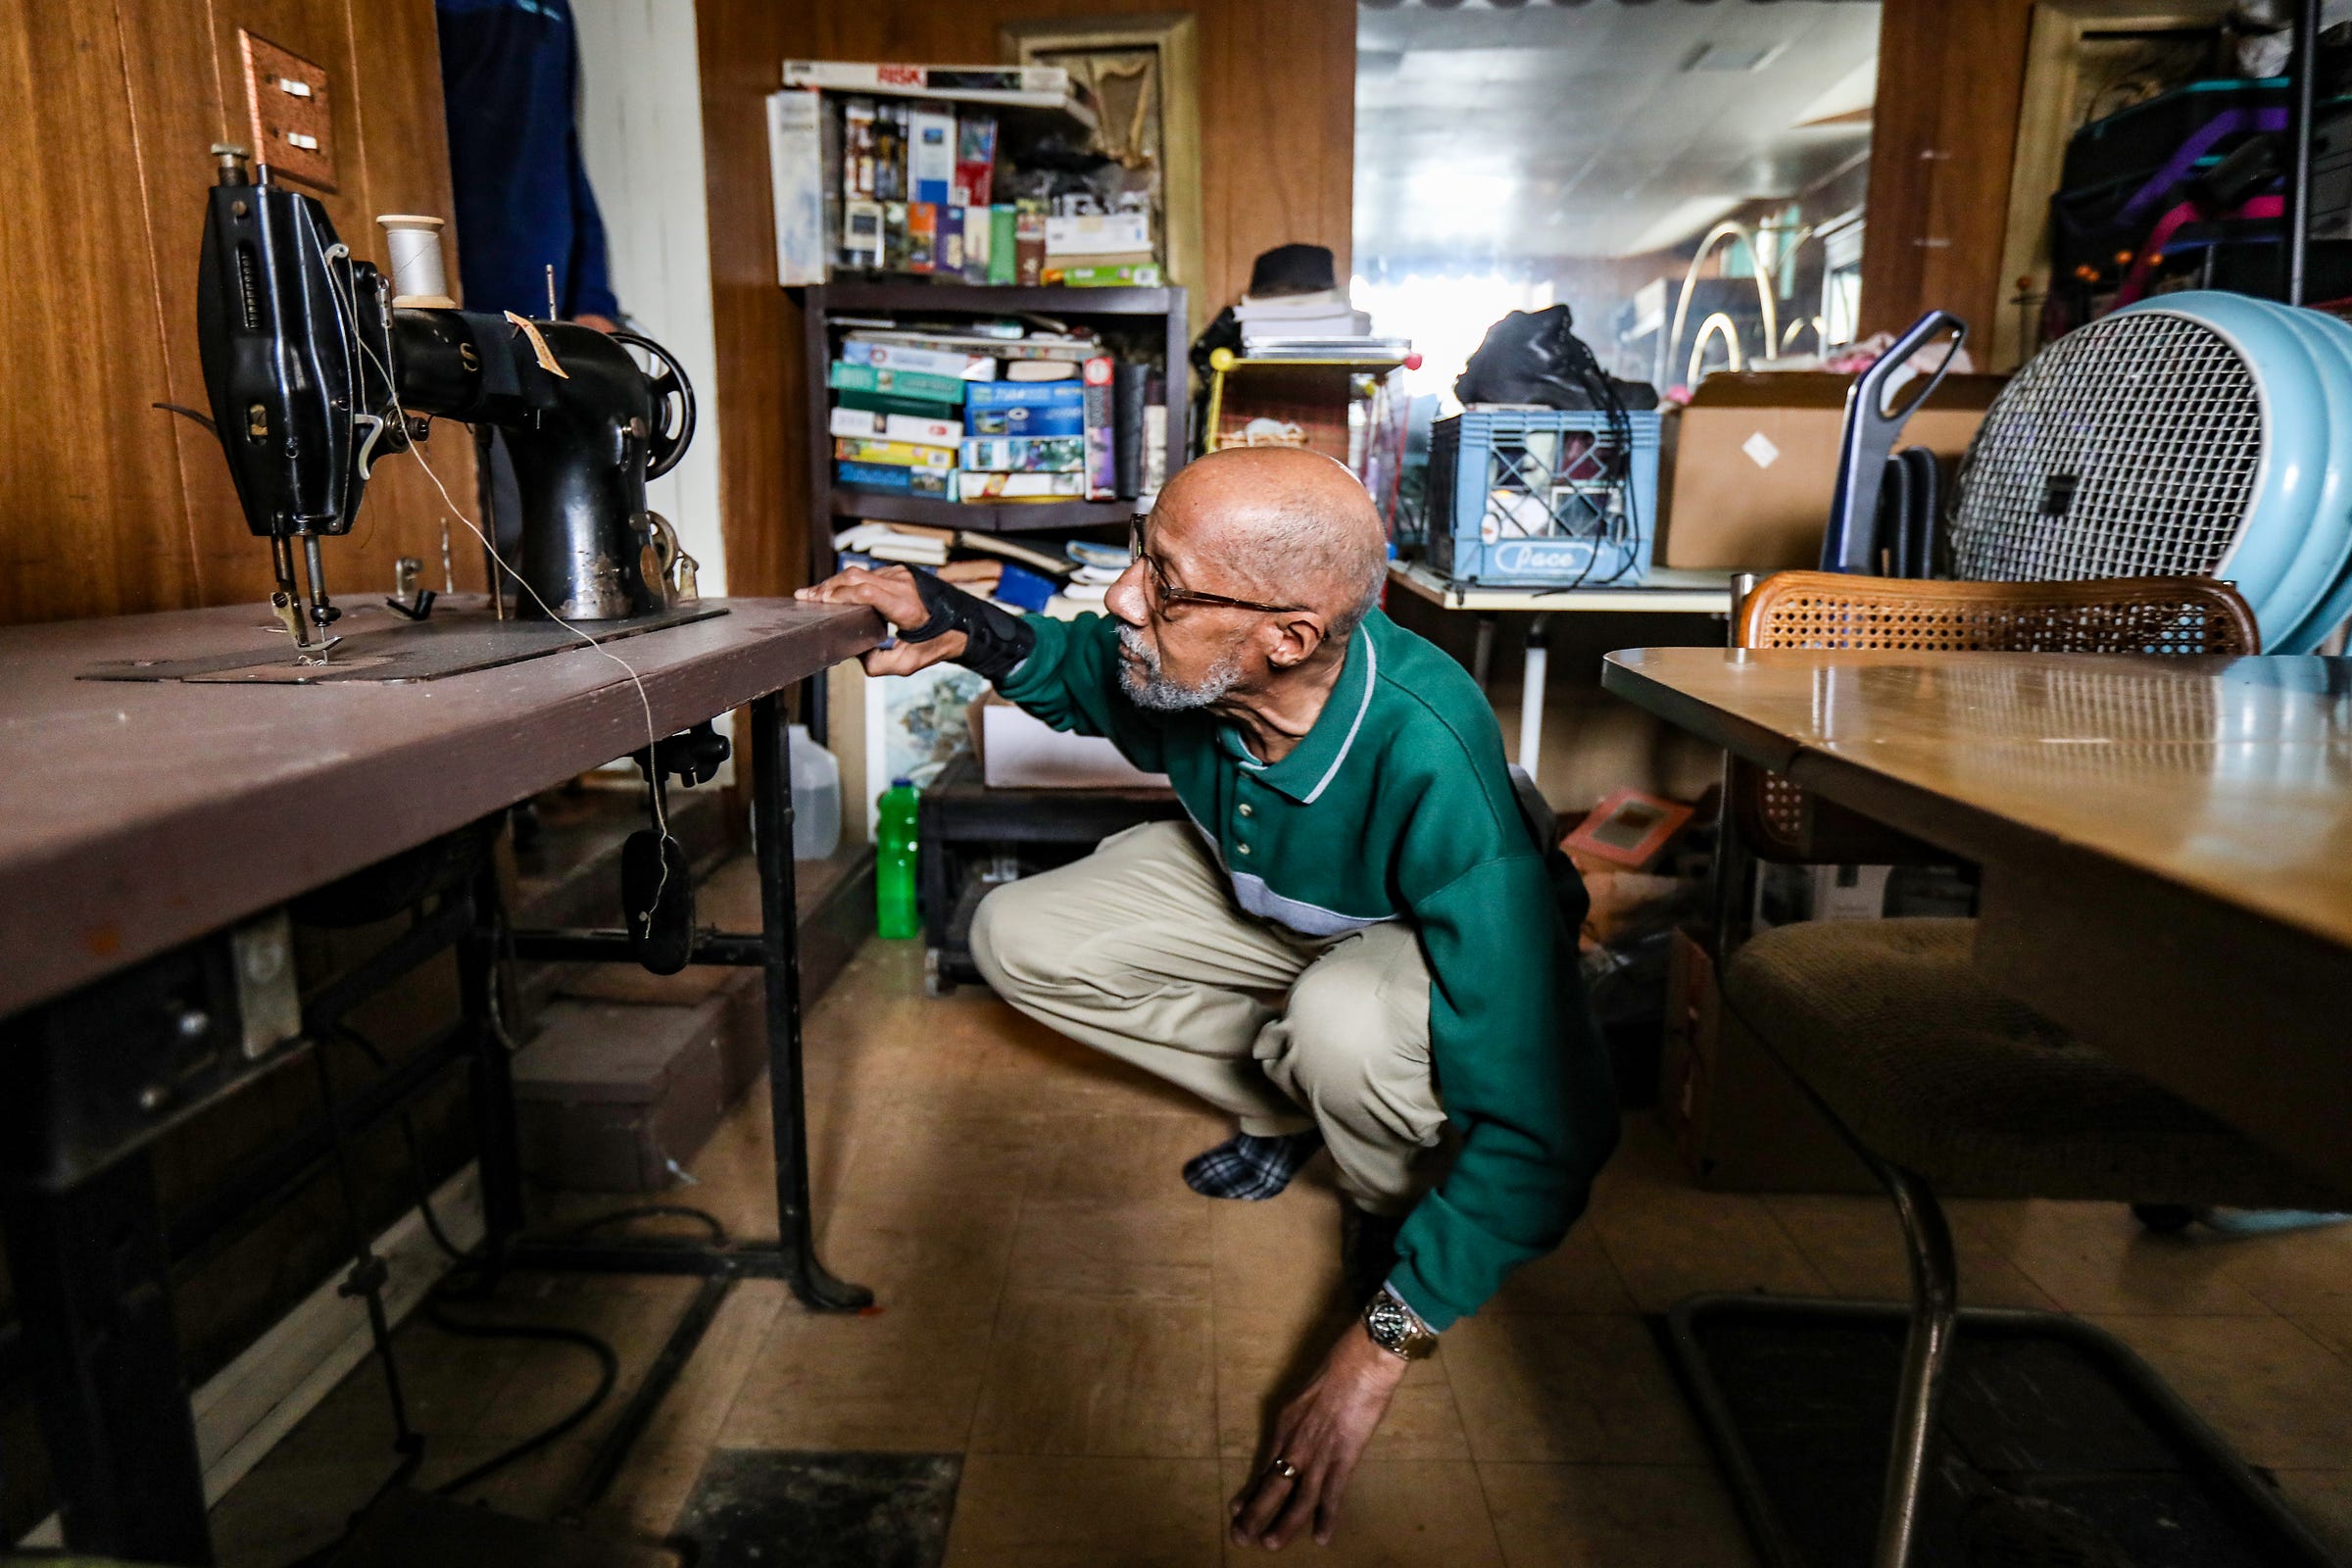 Adrian Ponder, 73, of Royal Oak looks for the switch to turn on his late Aunt Vivan McLaughlin's sewing machine at her home in Detroit on Tuesday, Feb. 8, 2022. Ponder retired from the Detroit Police Department in 1986 after witnessing his partner being shot and killed on duty. Suffering from Post Traumatic Stress Disorder, Ponder's relationship through the years with McLaughlin has helped him to heal to the point where he can perform his security job today at Wayne State University.